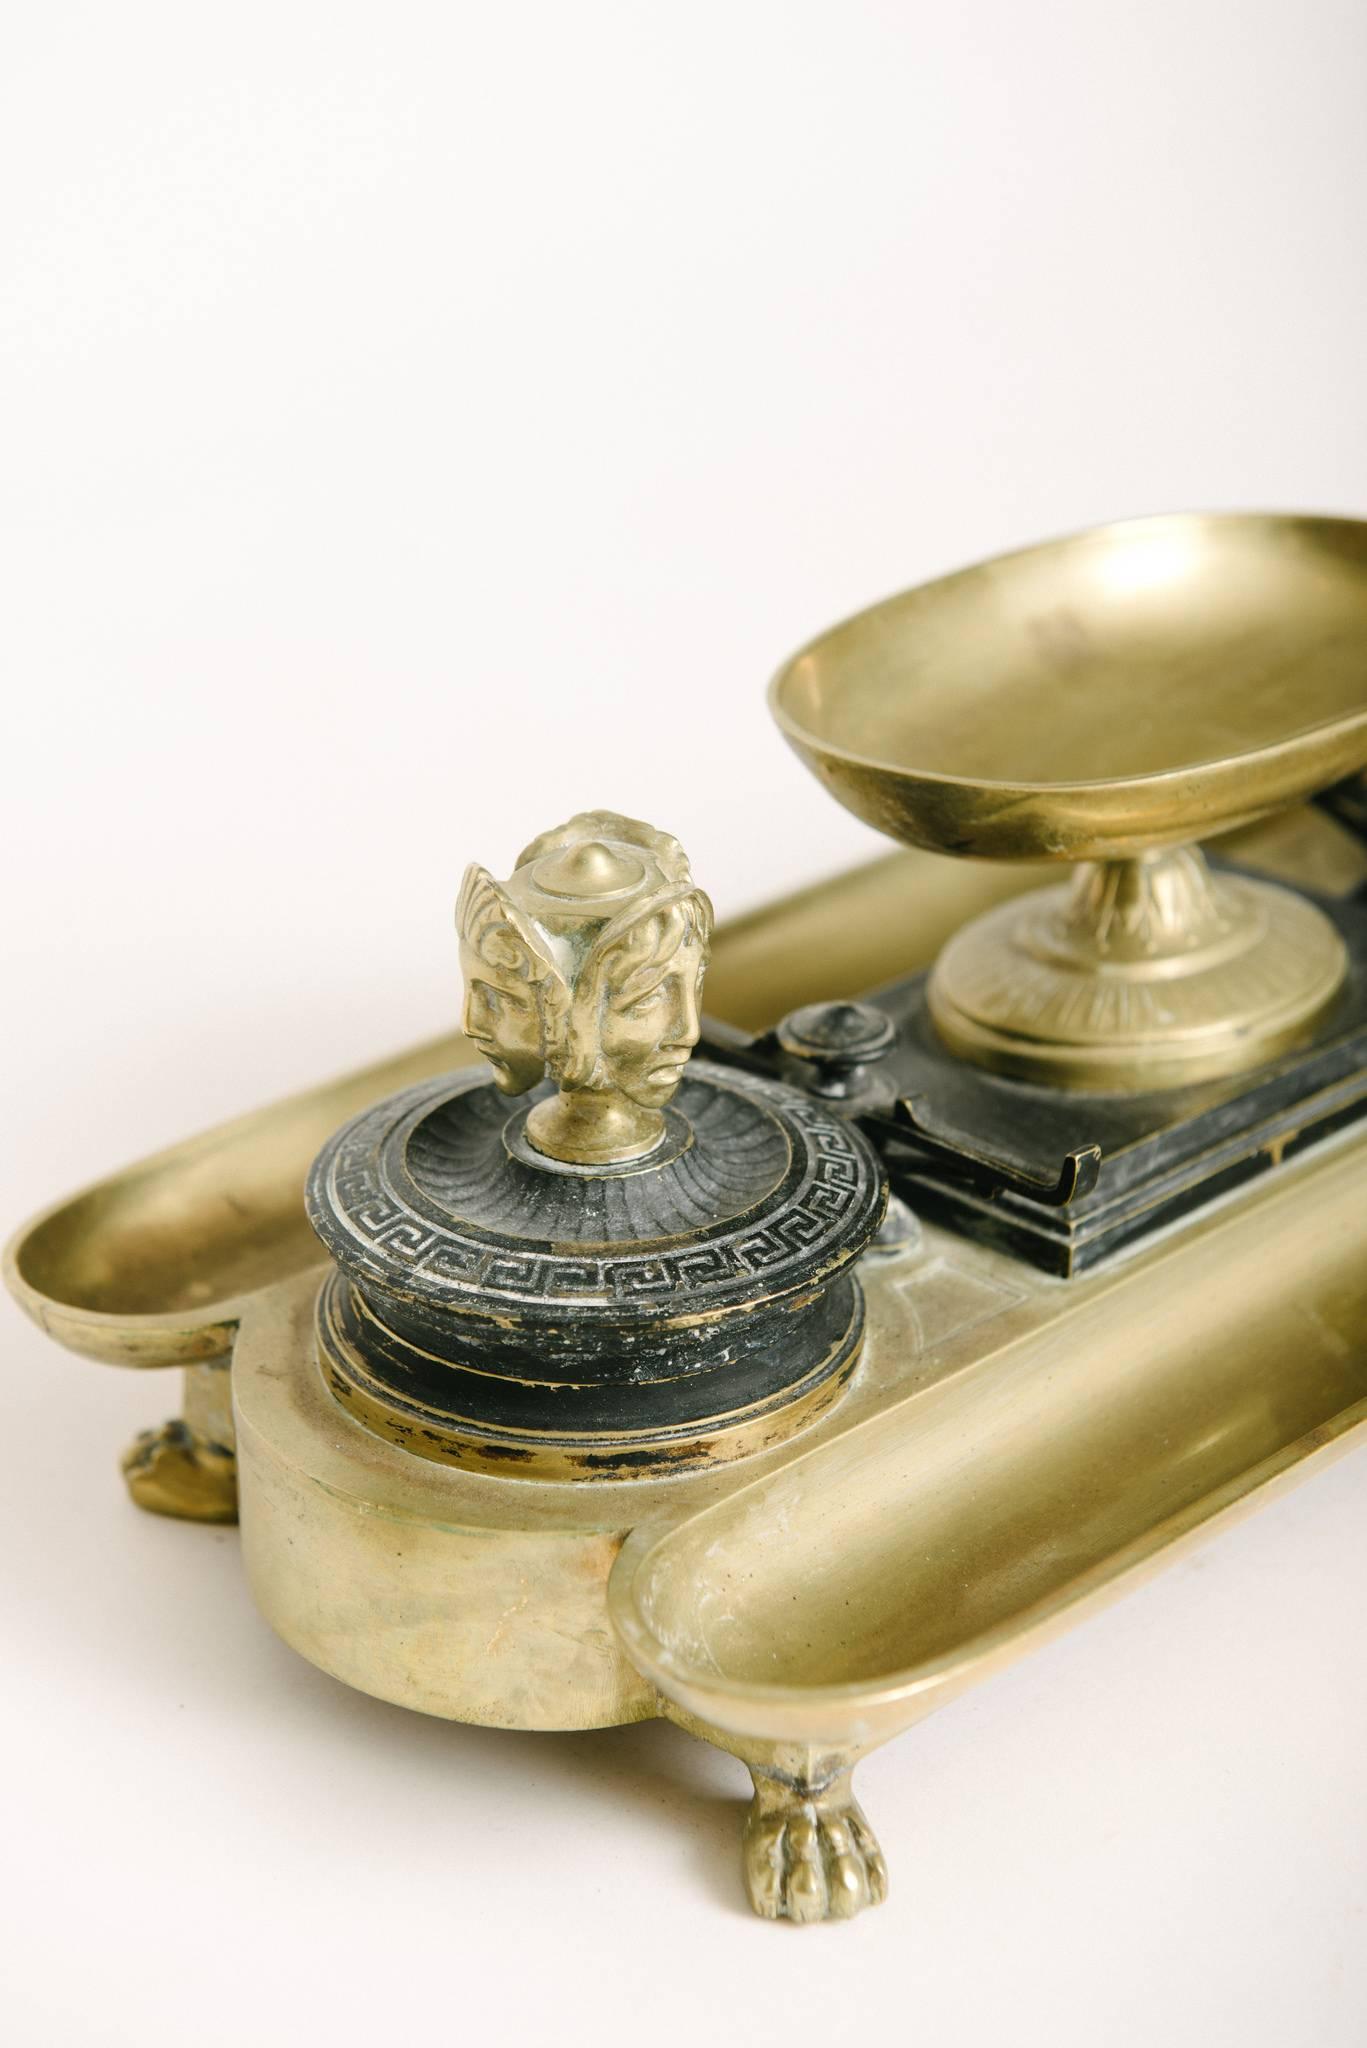 A 19th century neoclassical bronze desk set featuring two inkwells that are flanked by two elongated trays with a centre oval pedestal dish. The inkwells are black patinated sporting a Greek key motif and are topped with a three face decorative